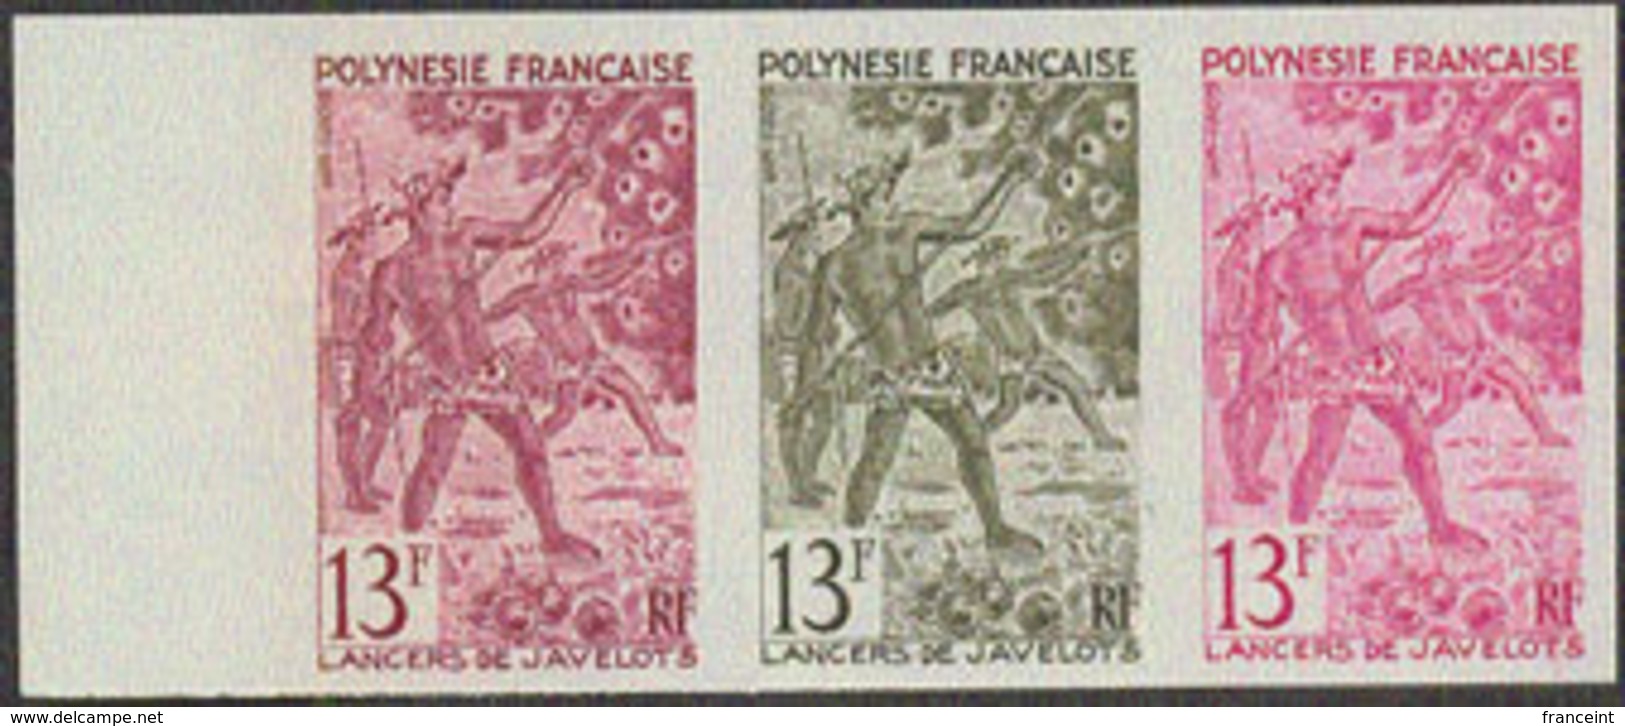 FRENCH POLYNESIA (1967) Javelin Throwing. Trial Color Proof Strip Of 3. Scott No 229, Yvert No 48. - Imperforates, Proofs & Errors